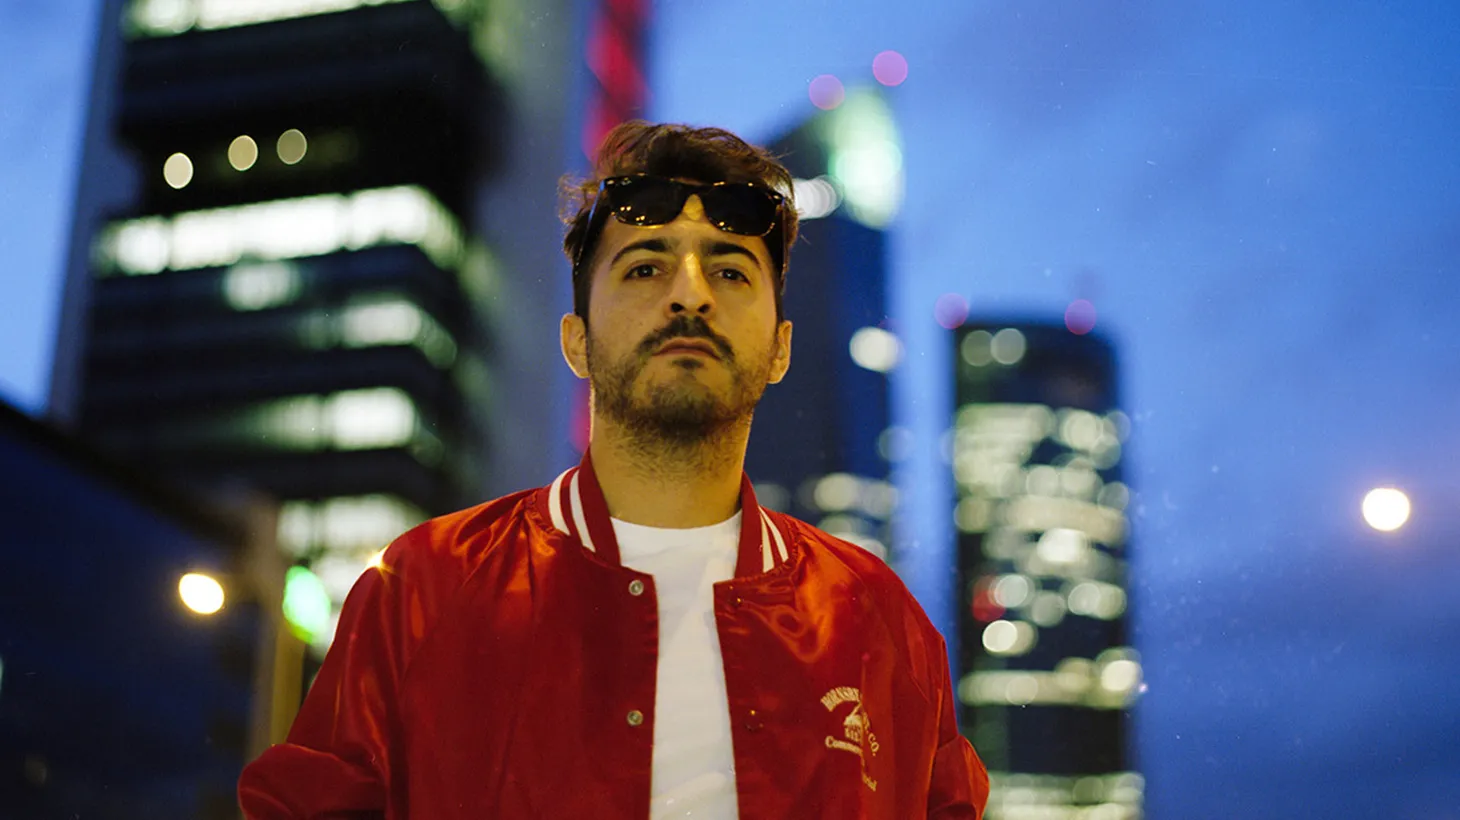 We've been waiting patiently for Spanish producer/musician El Guincho (aka Pablo Díaz-Reixa) to finally make it out to Los Angeles and pay us a visit.